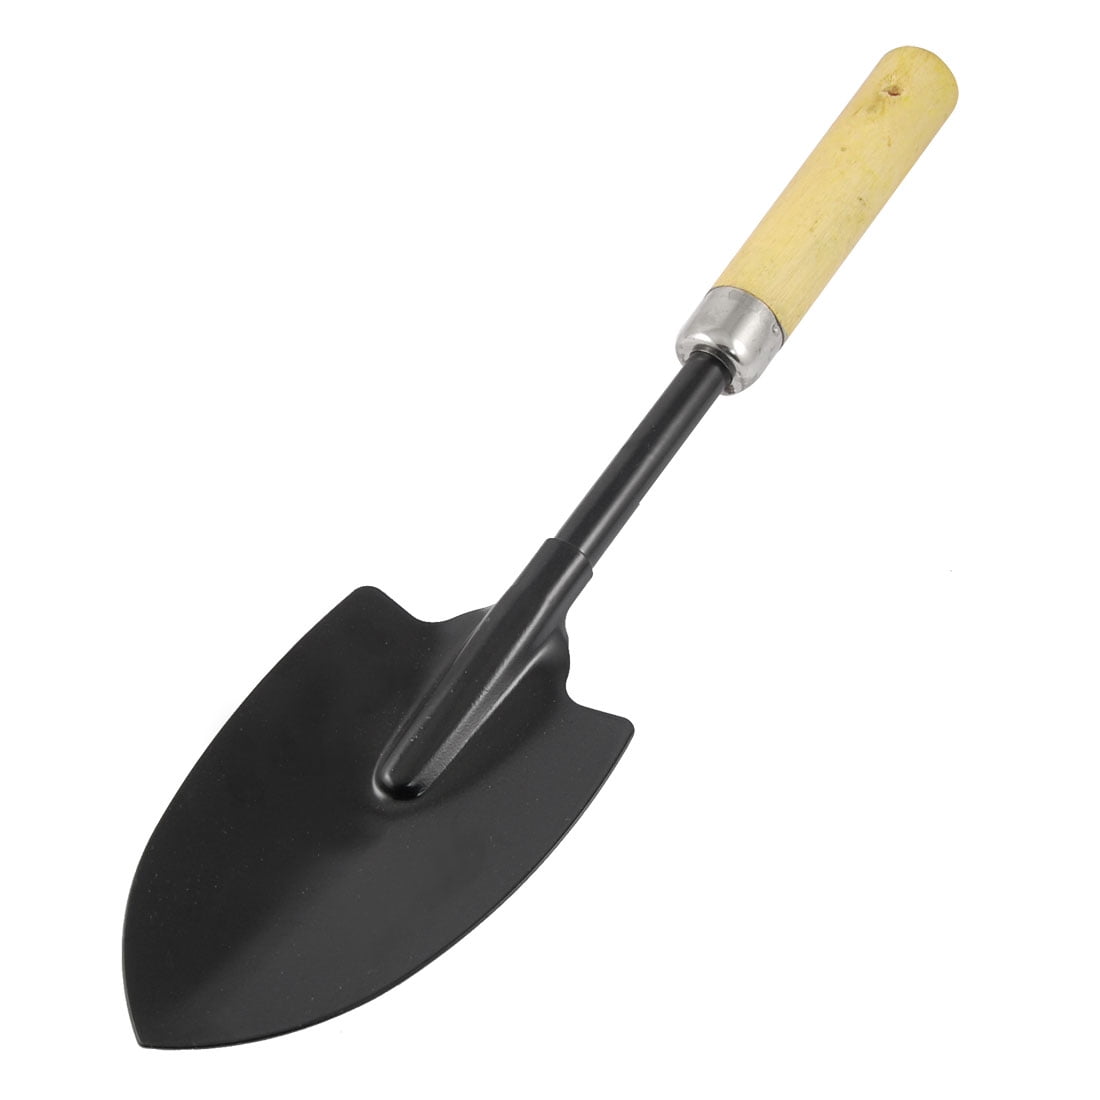 6.1 Inch Lightweight Aluminum Alloy Hand Shovel Trowel for Camping Hiking R4Z3 